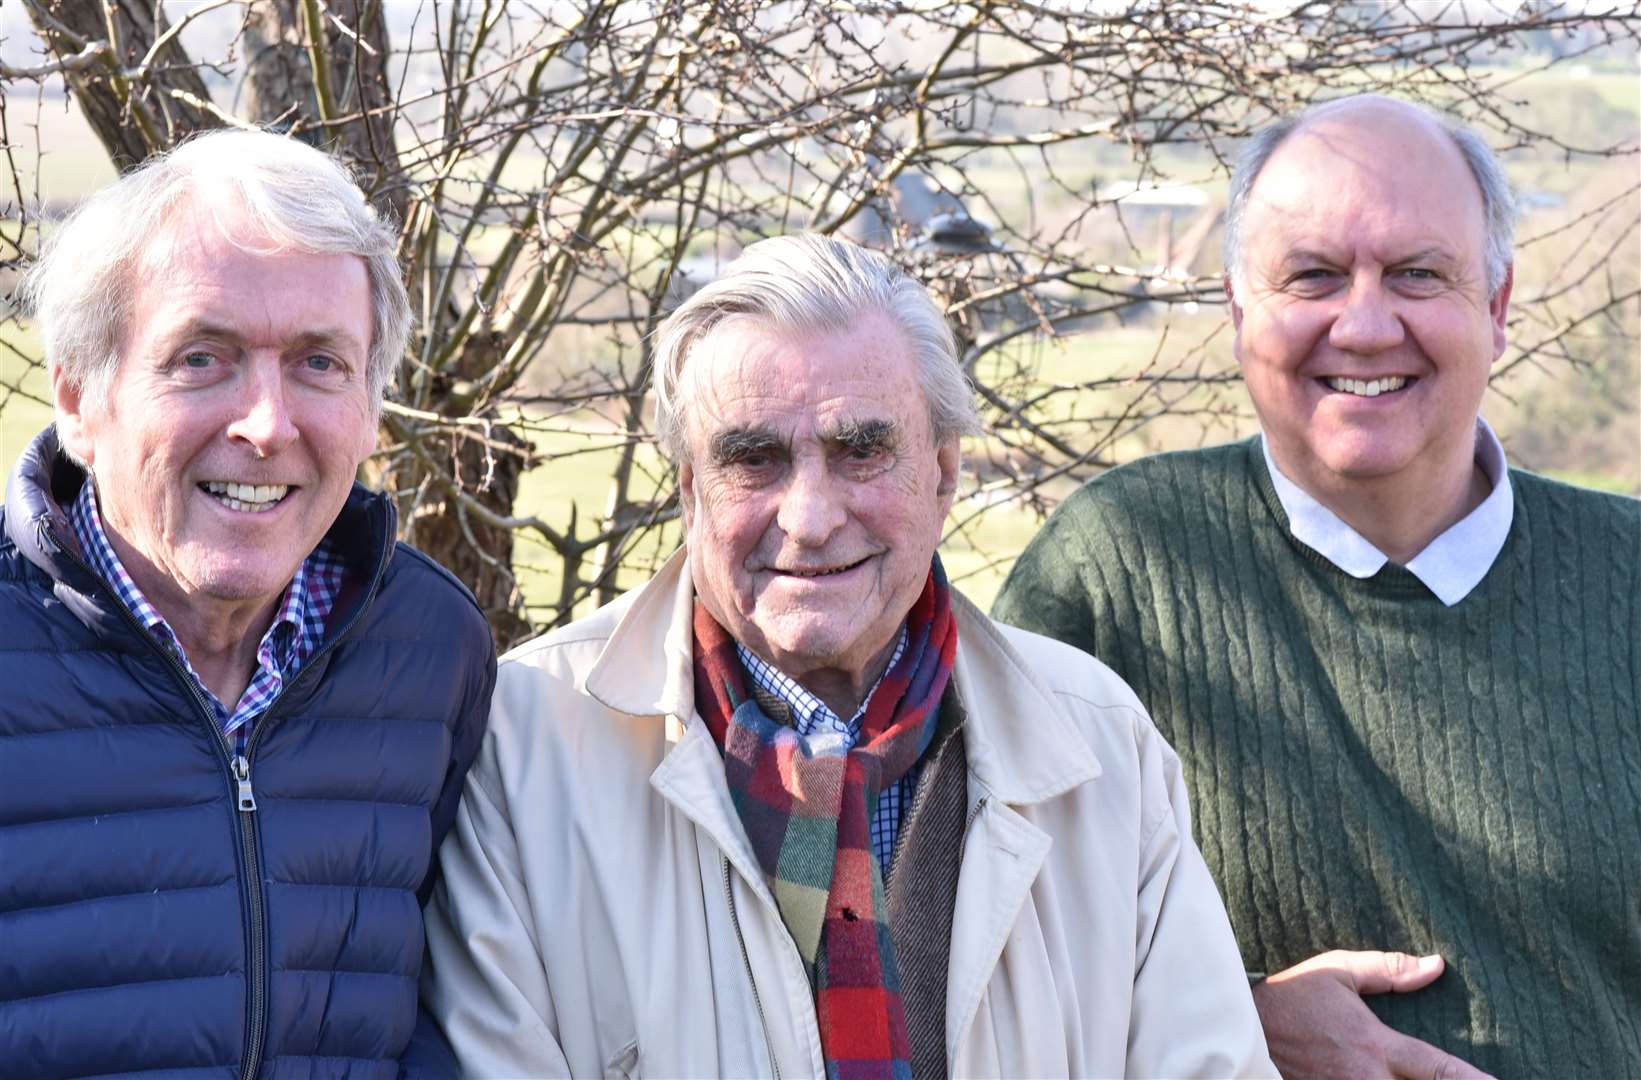 From left, Derek Burles, Simon Foster and Jonathan Tennant of the Save Aldington campaign group